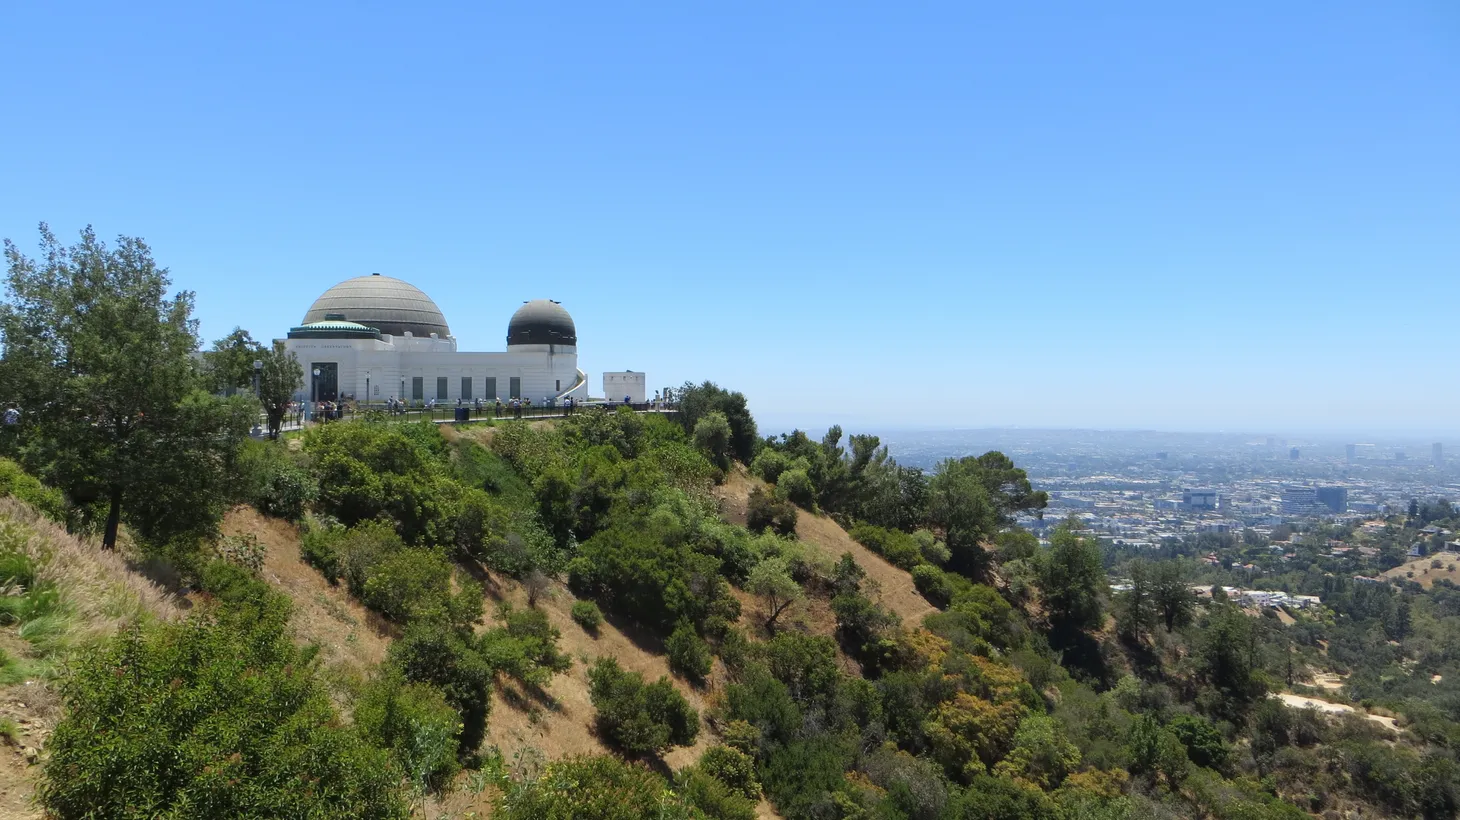 The observatory is seen in Griffith Park.